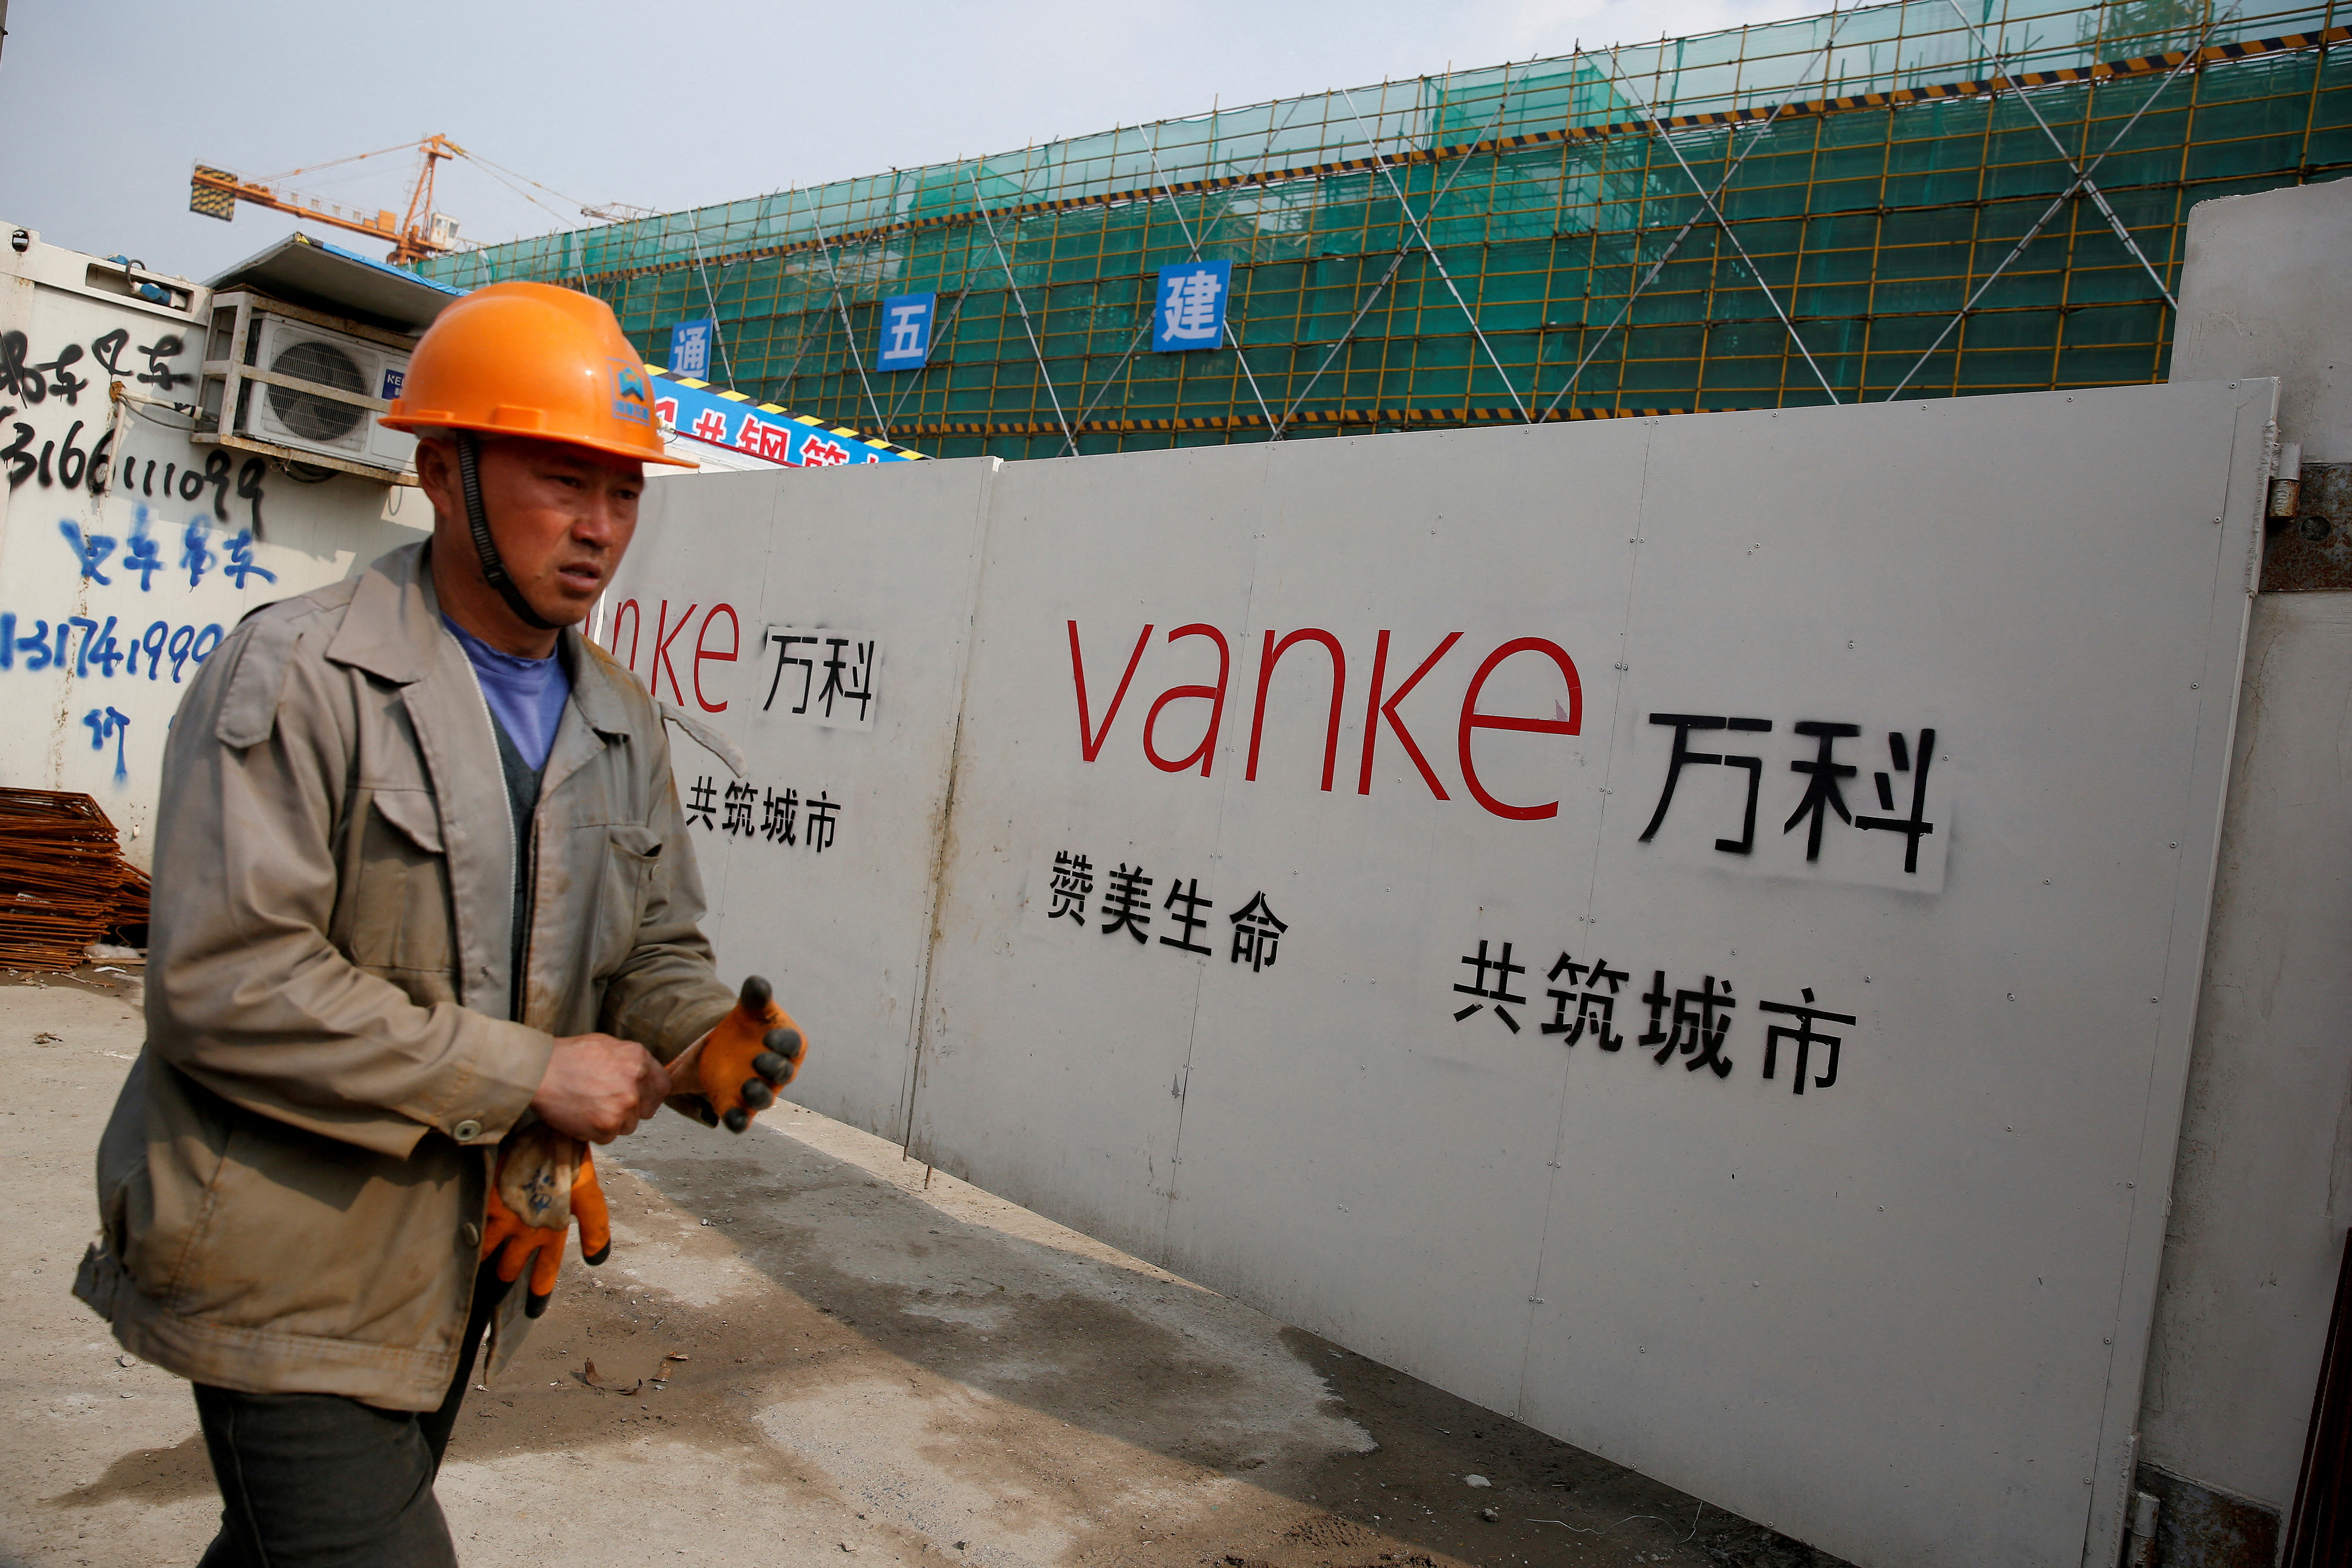 FILE PHOTO: A person walks past by a gate with a sign of Vanke at a construction site in Shanghai